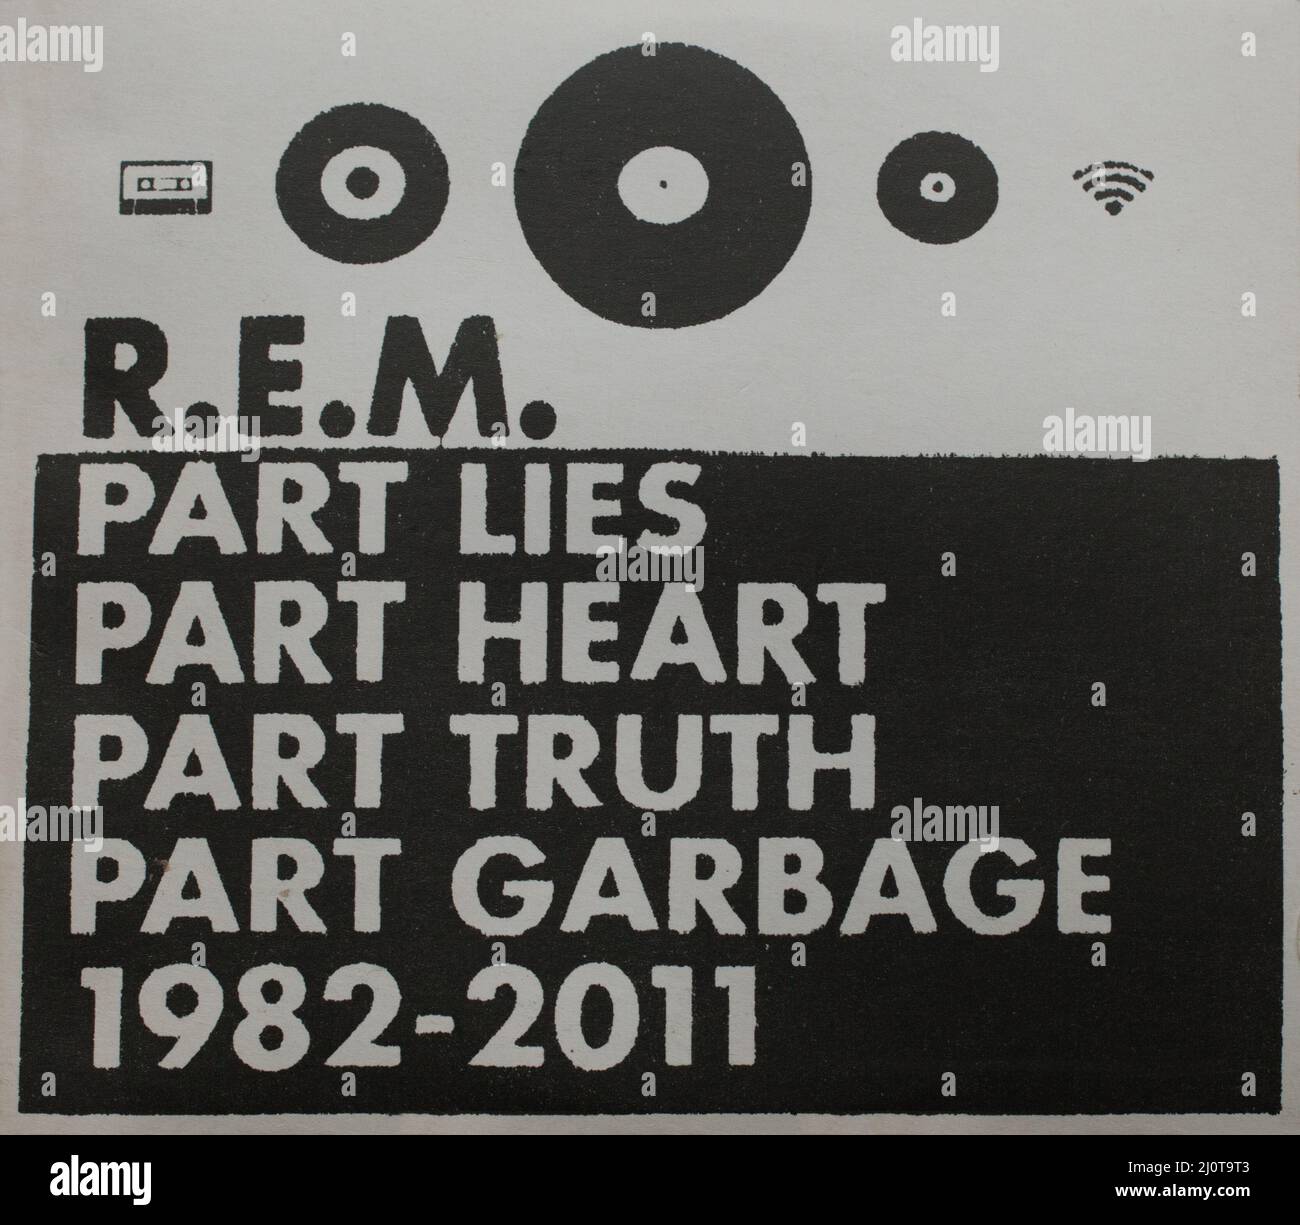 The cd album cover to R.E.M - Part Lies, Part Heart, Part Truth, Part Garbage 1982 - 2011 Stock Photo